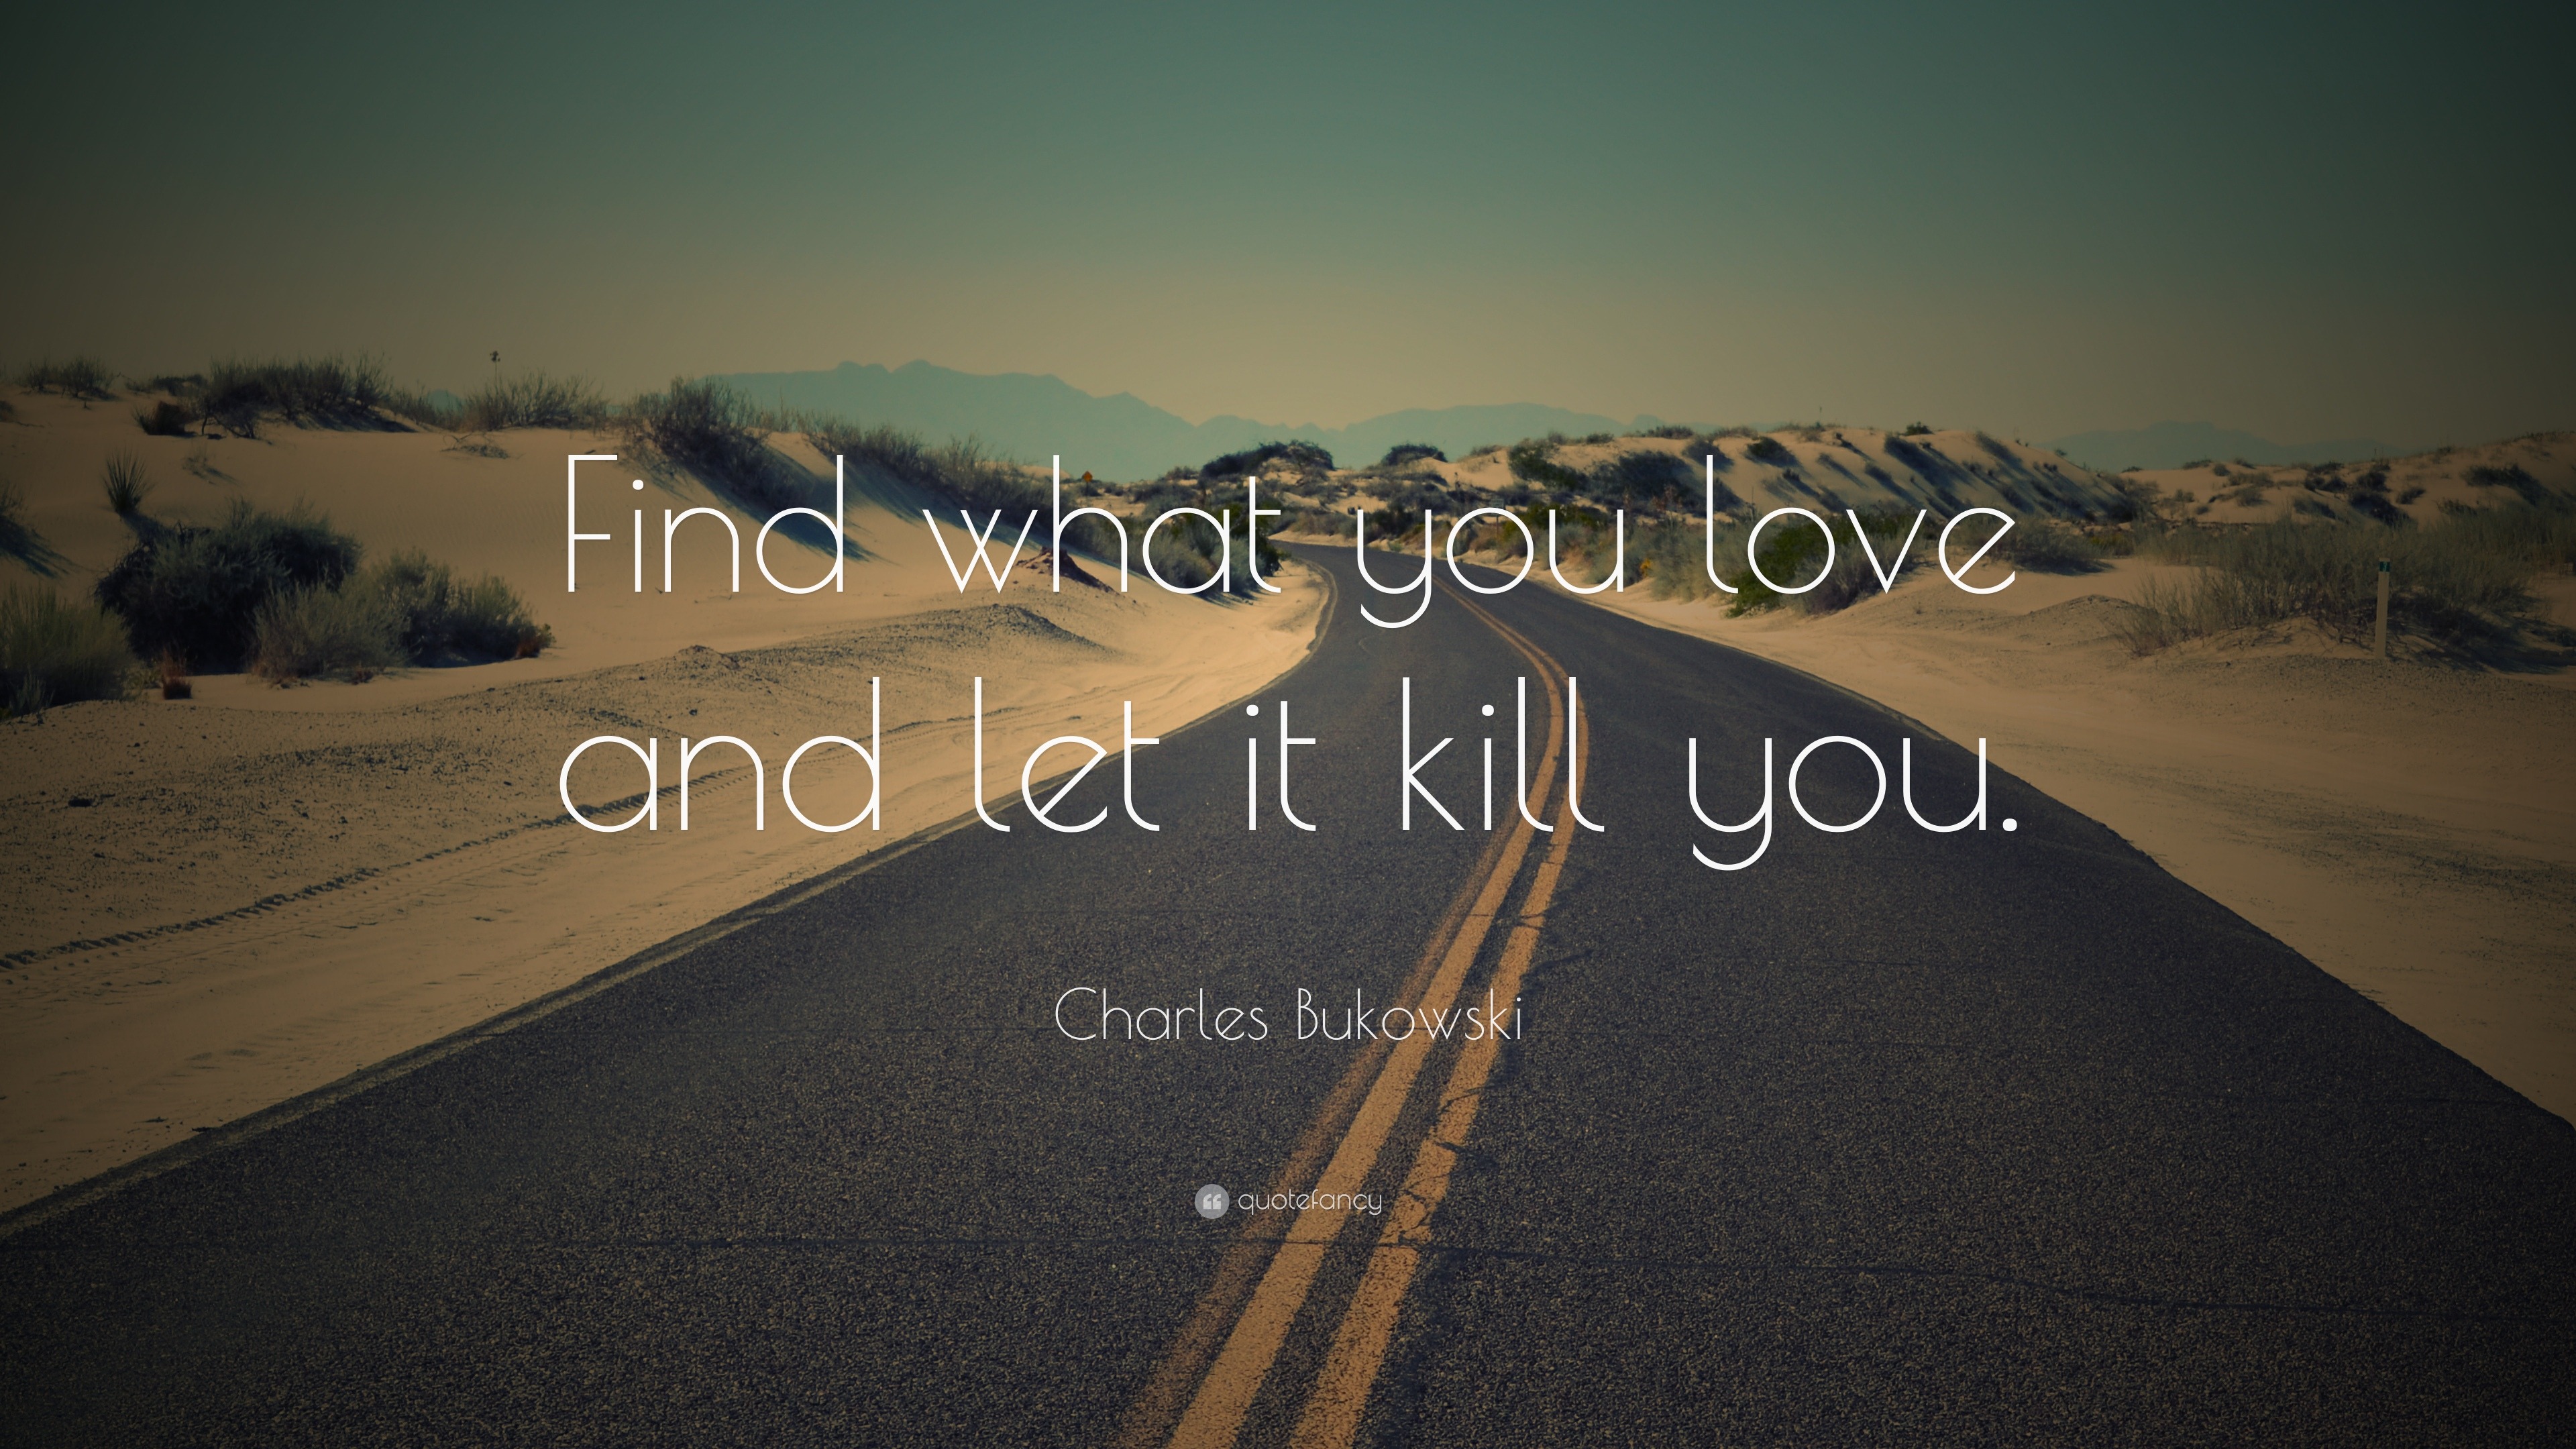 2636-Charles-Bukowski-Quote-Find-what-you-love-and-let-it-kill-you.jpg